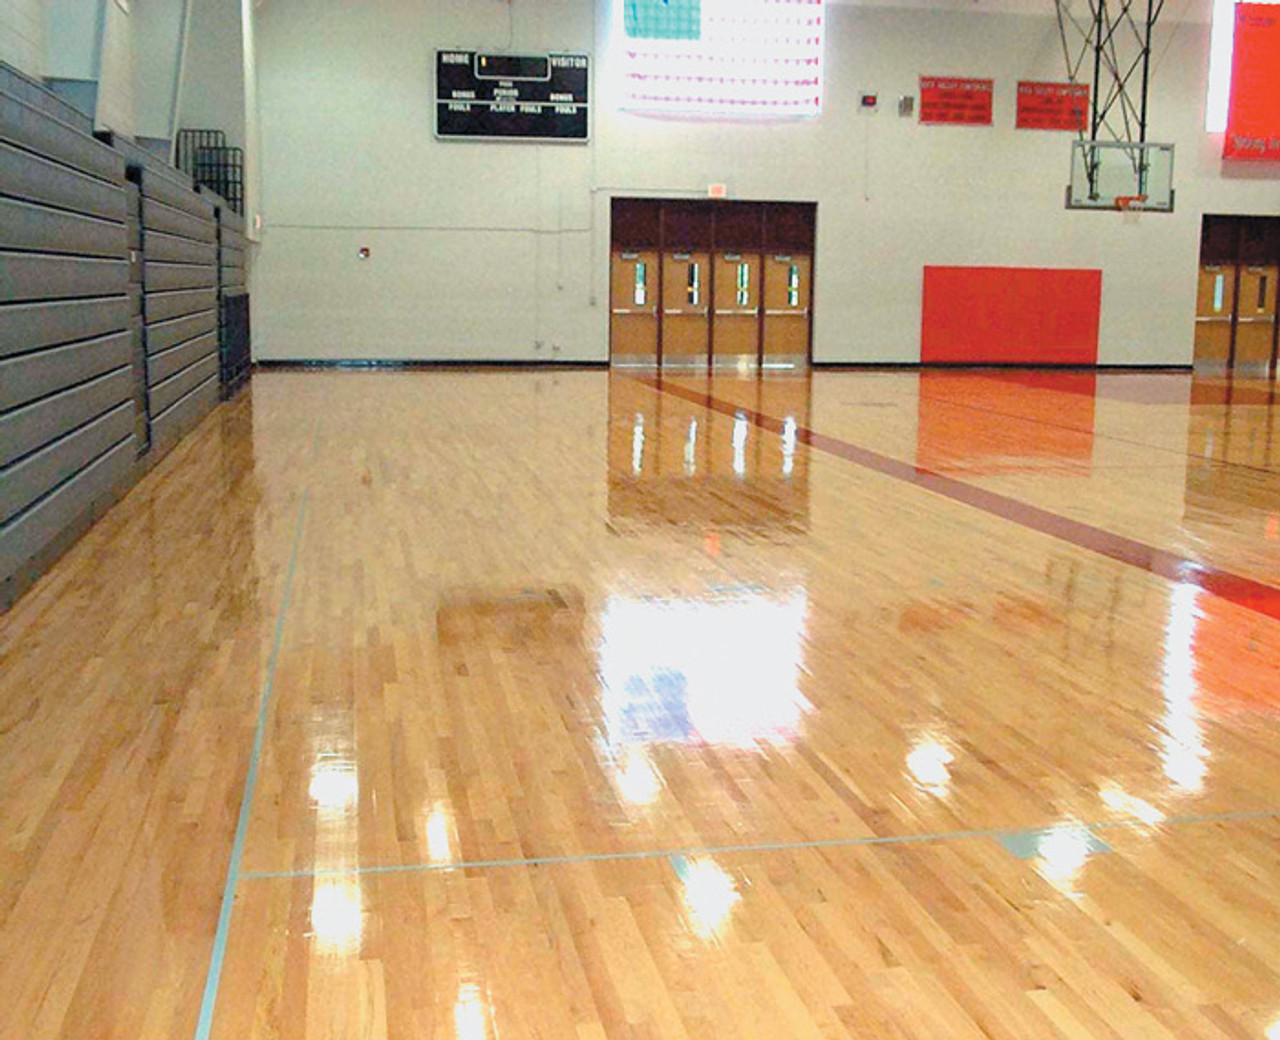 This gym floor is not only protected with Durability+ but has a gorgeous gloss as well.